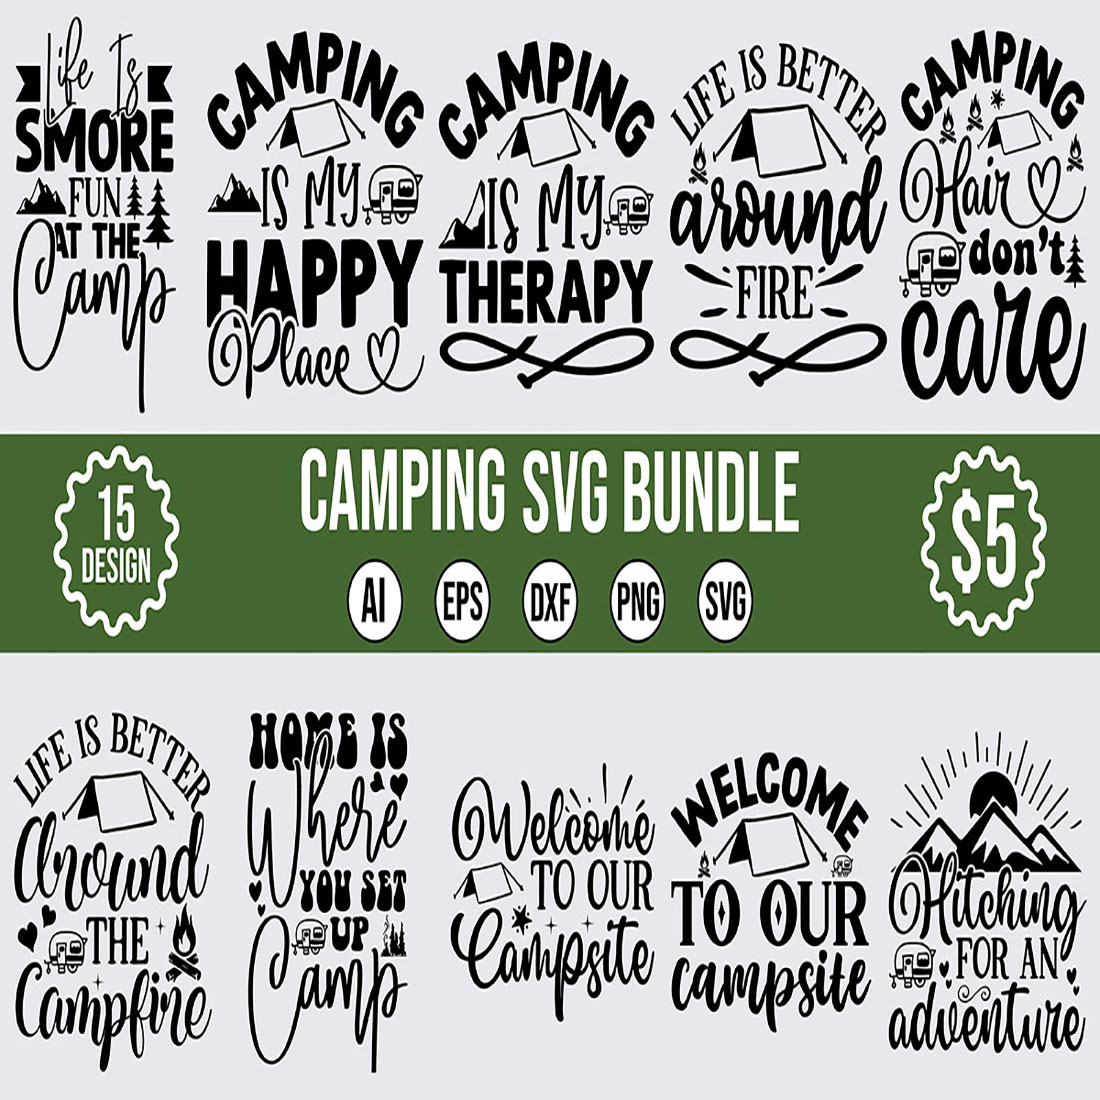 15 Camping SVG Designs Bundle Vector Template cover image.